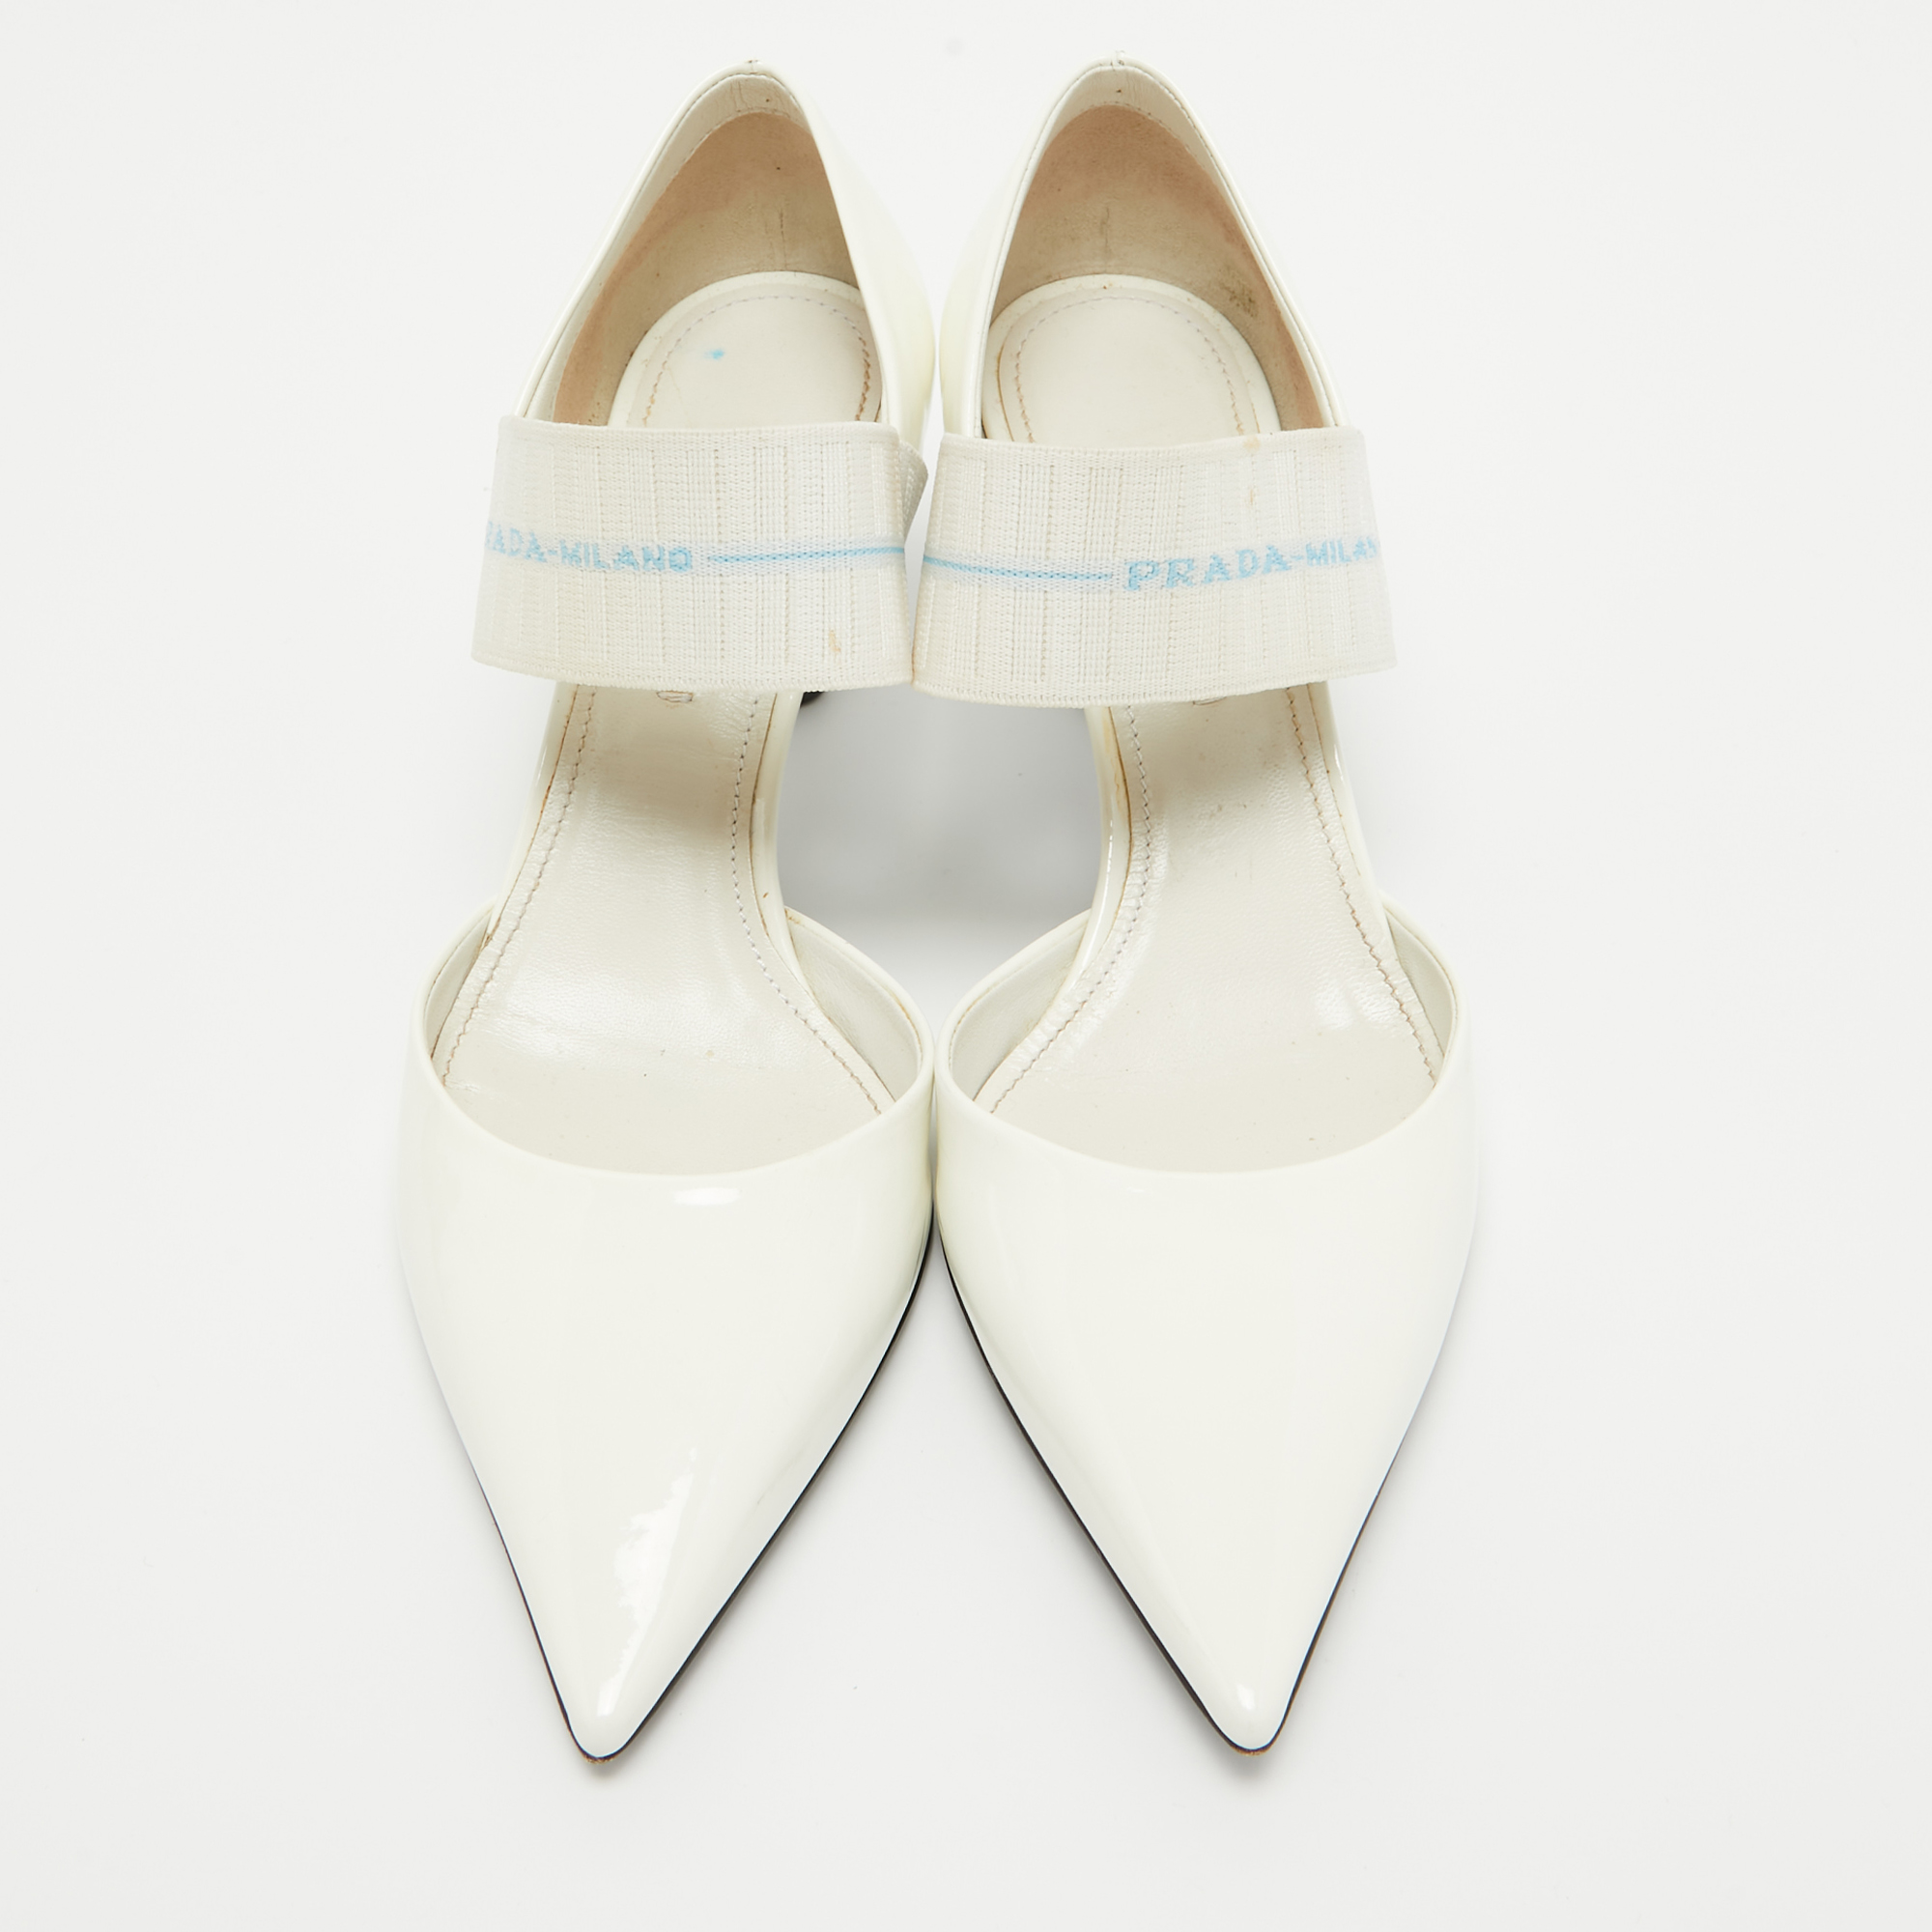 Prada White Patent Leather And Elastic Mary Jane D'orsay Pumps Size 36.5